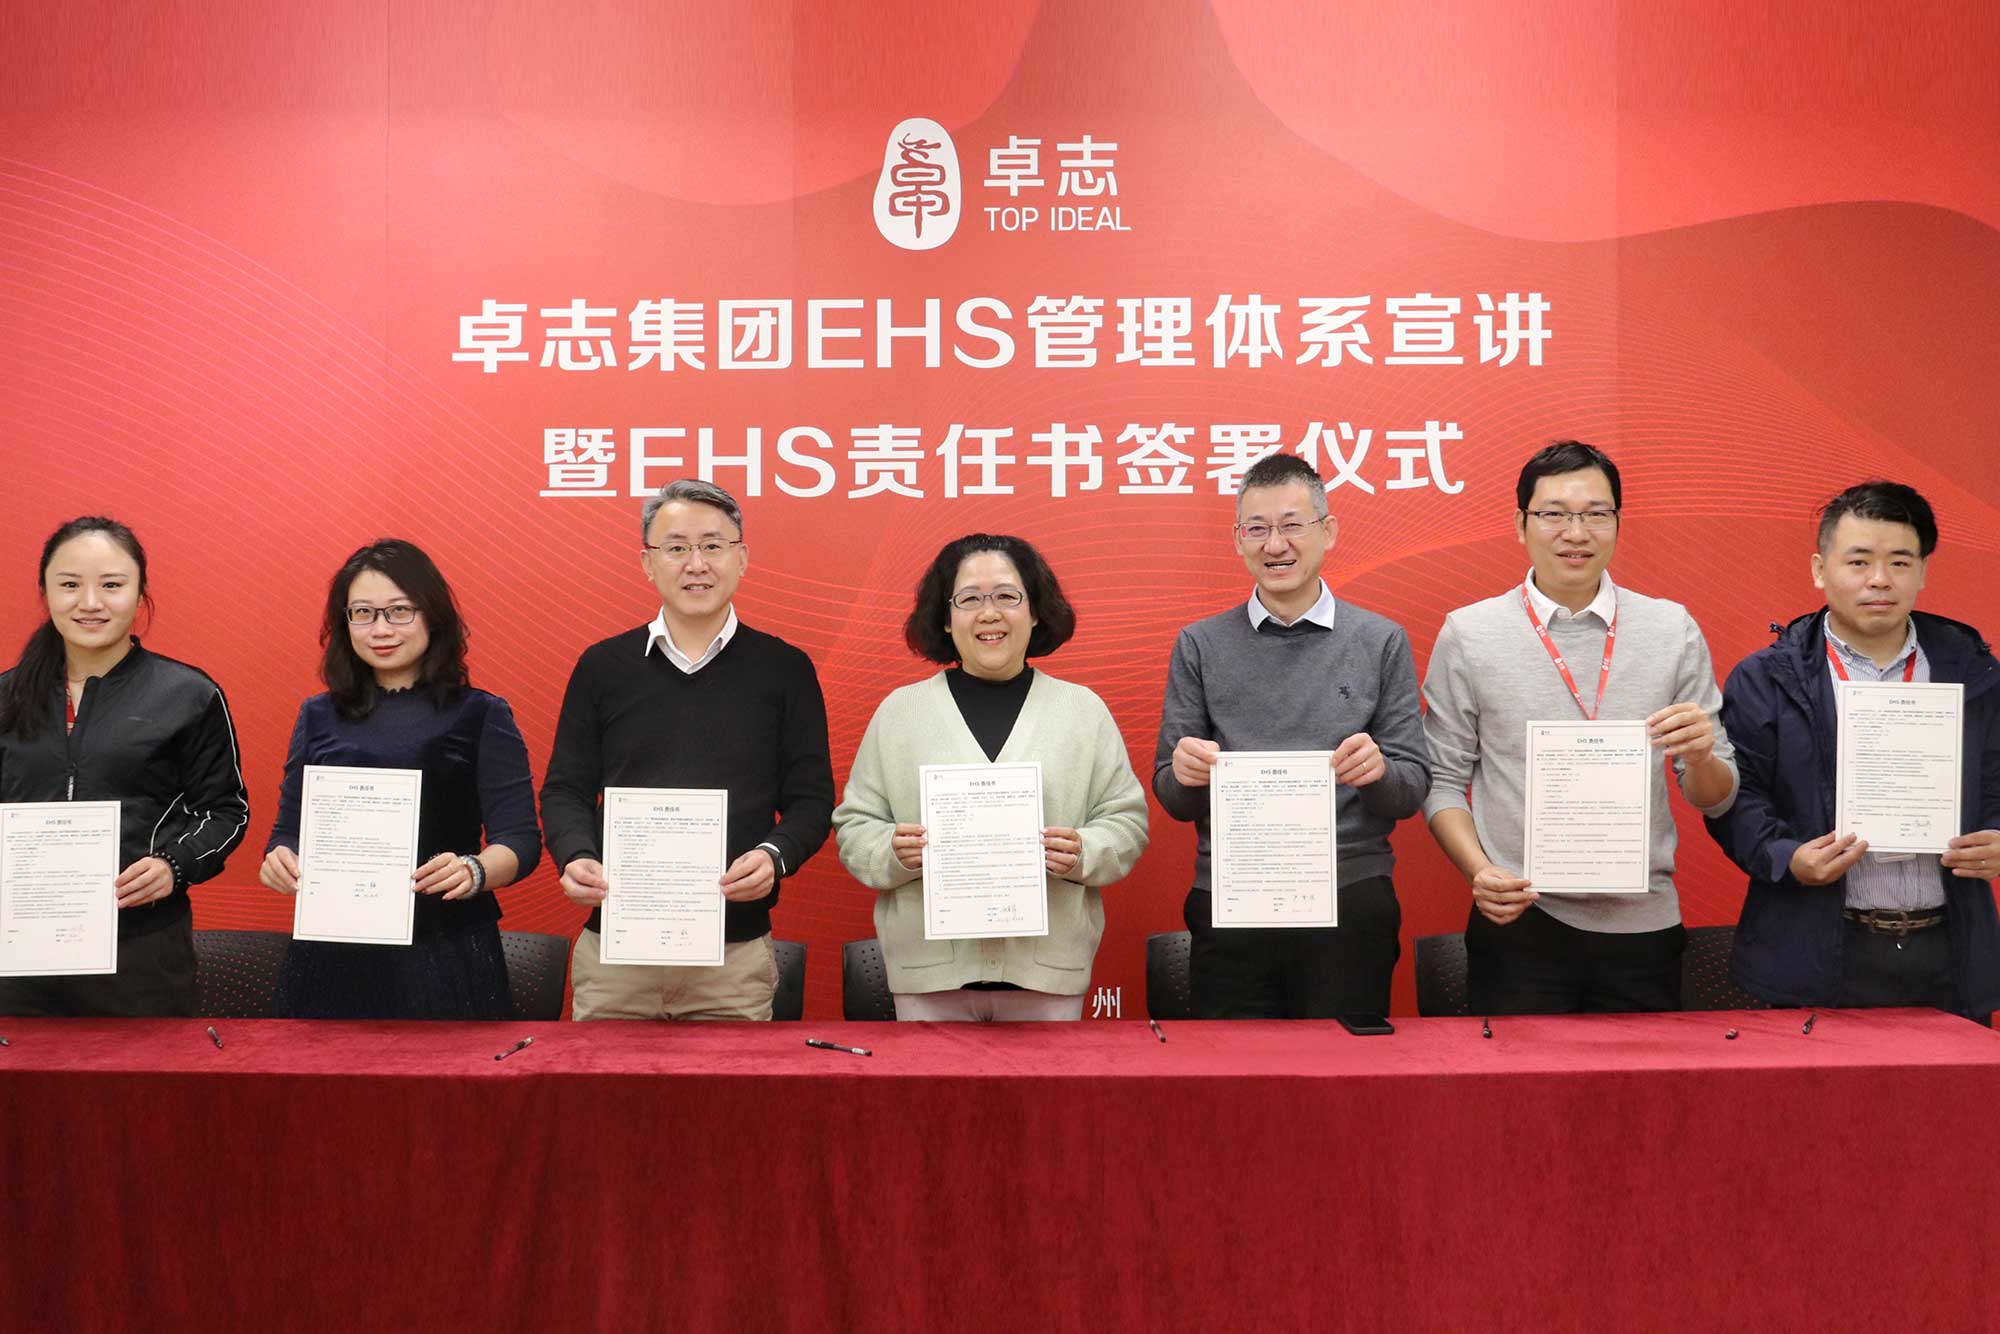 Top Ideal Group EHS management system presentation and EHS responsibility letter signing ceremony